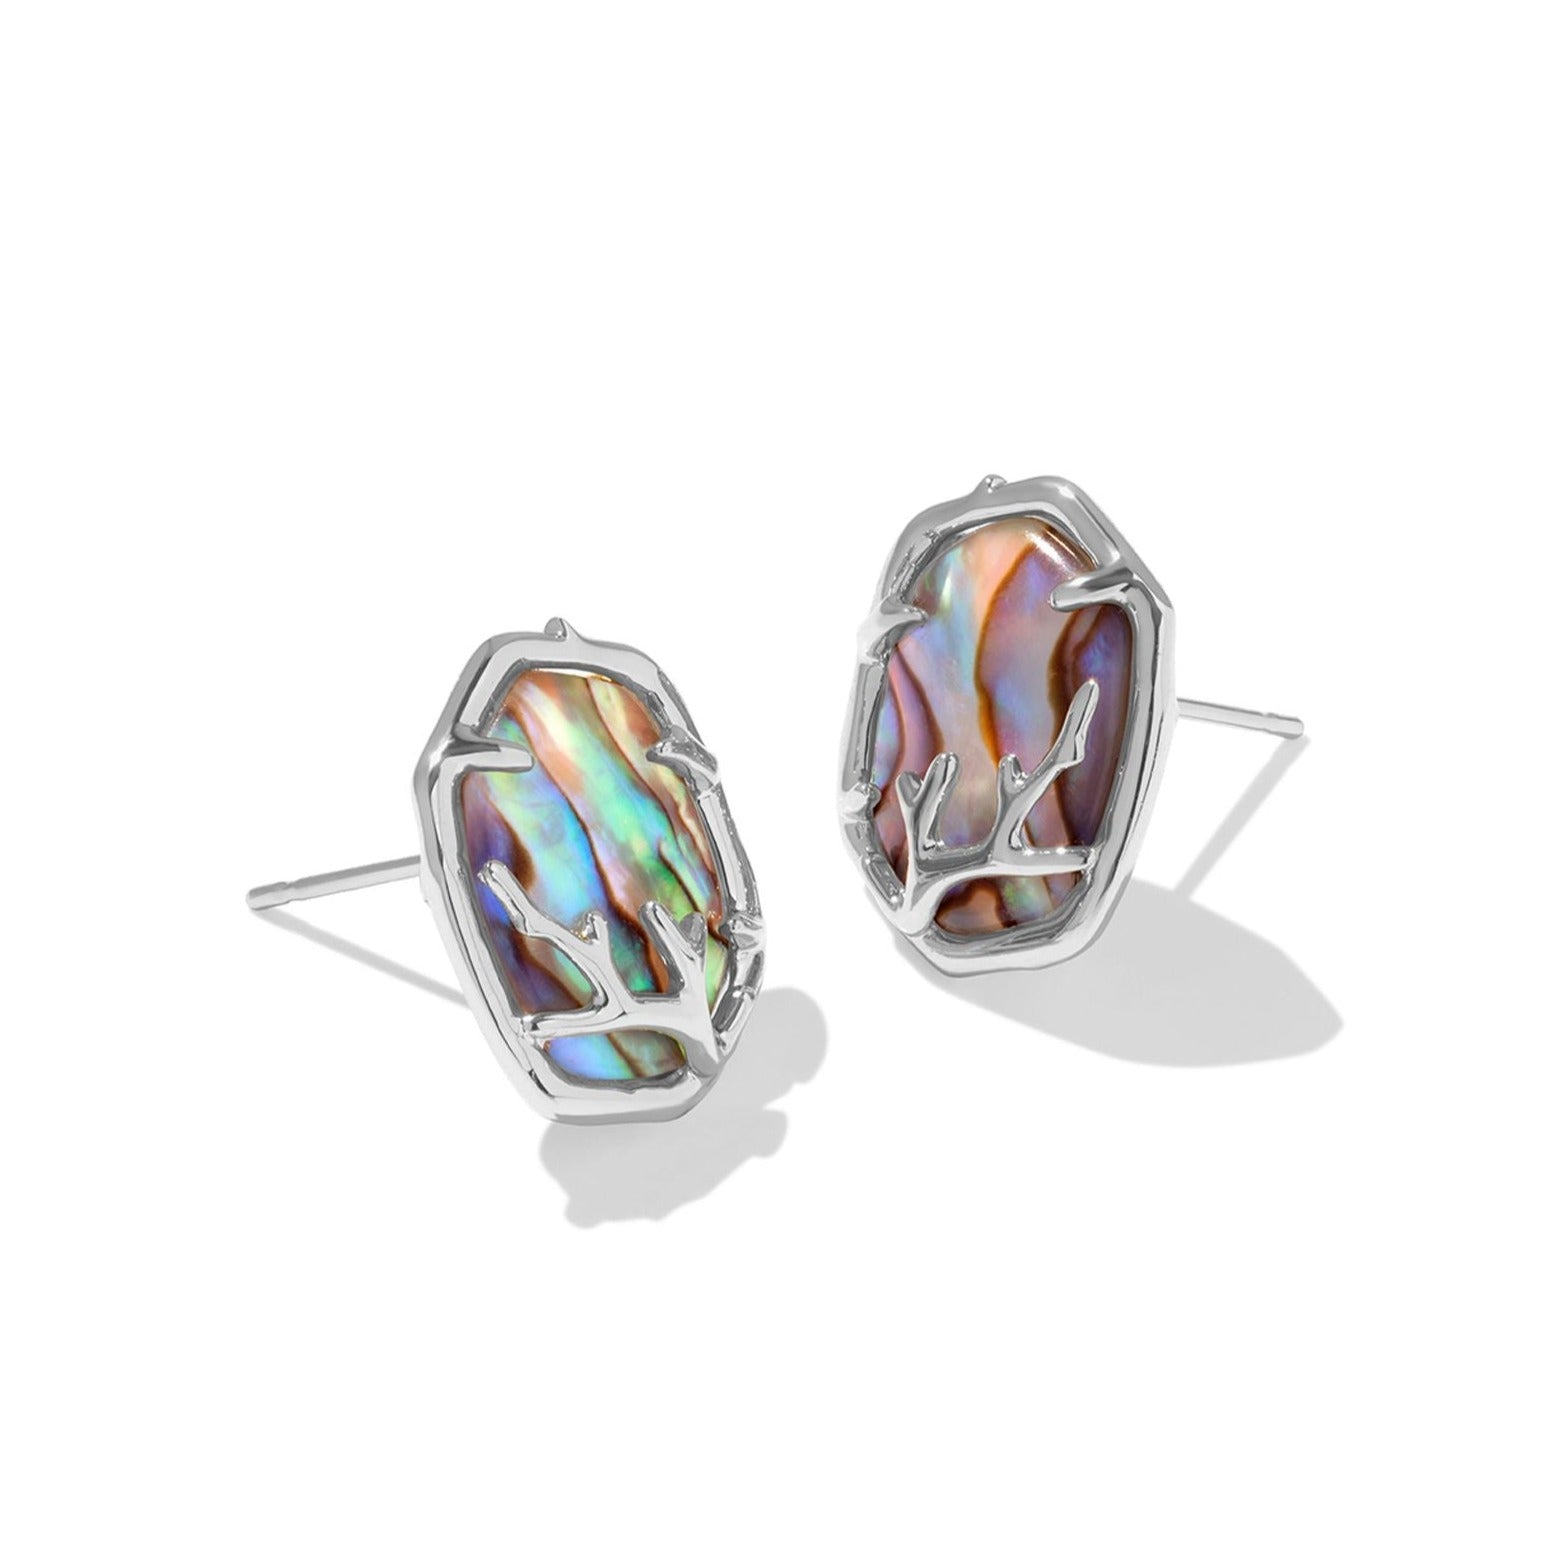 Kendra Scott | Daphne Silver Coral Frame Stud Earrings in Abalone - Giddy Up Glamour Boutique